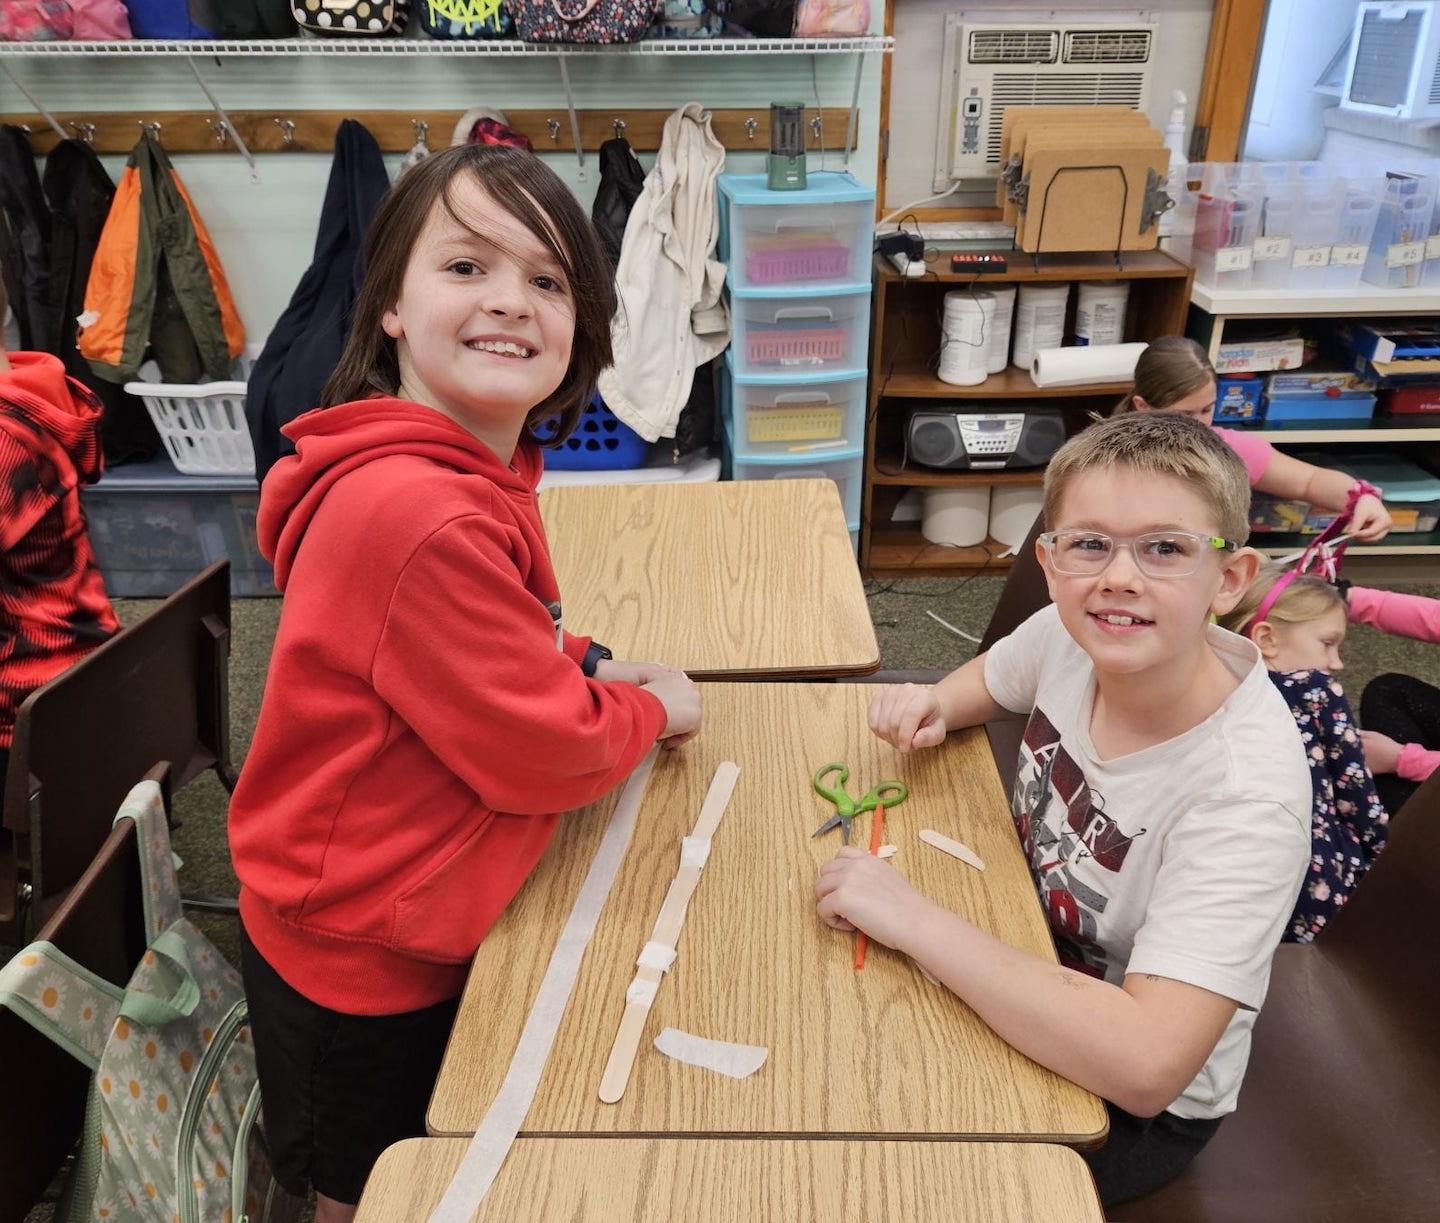 3rd-graders Griffin Mutzabaugh and Forrest Rasel designing their project 